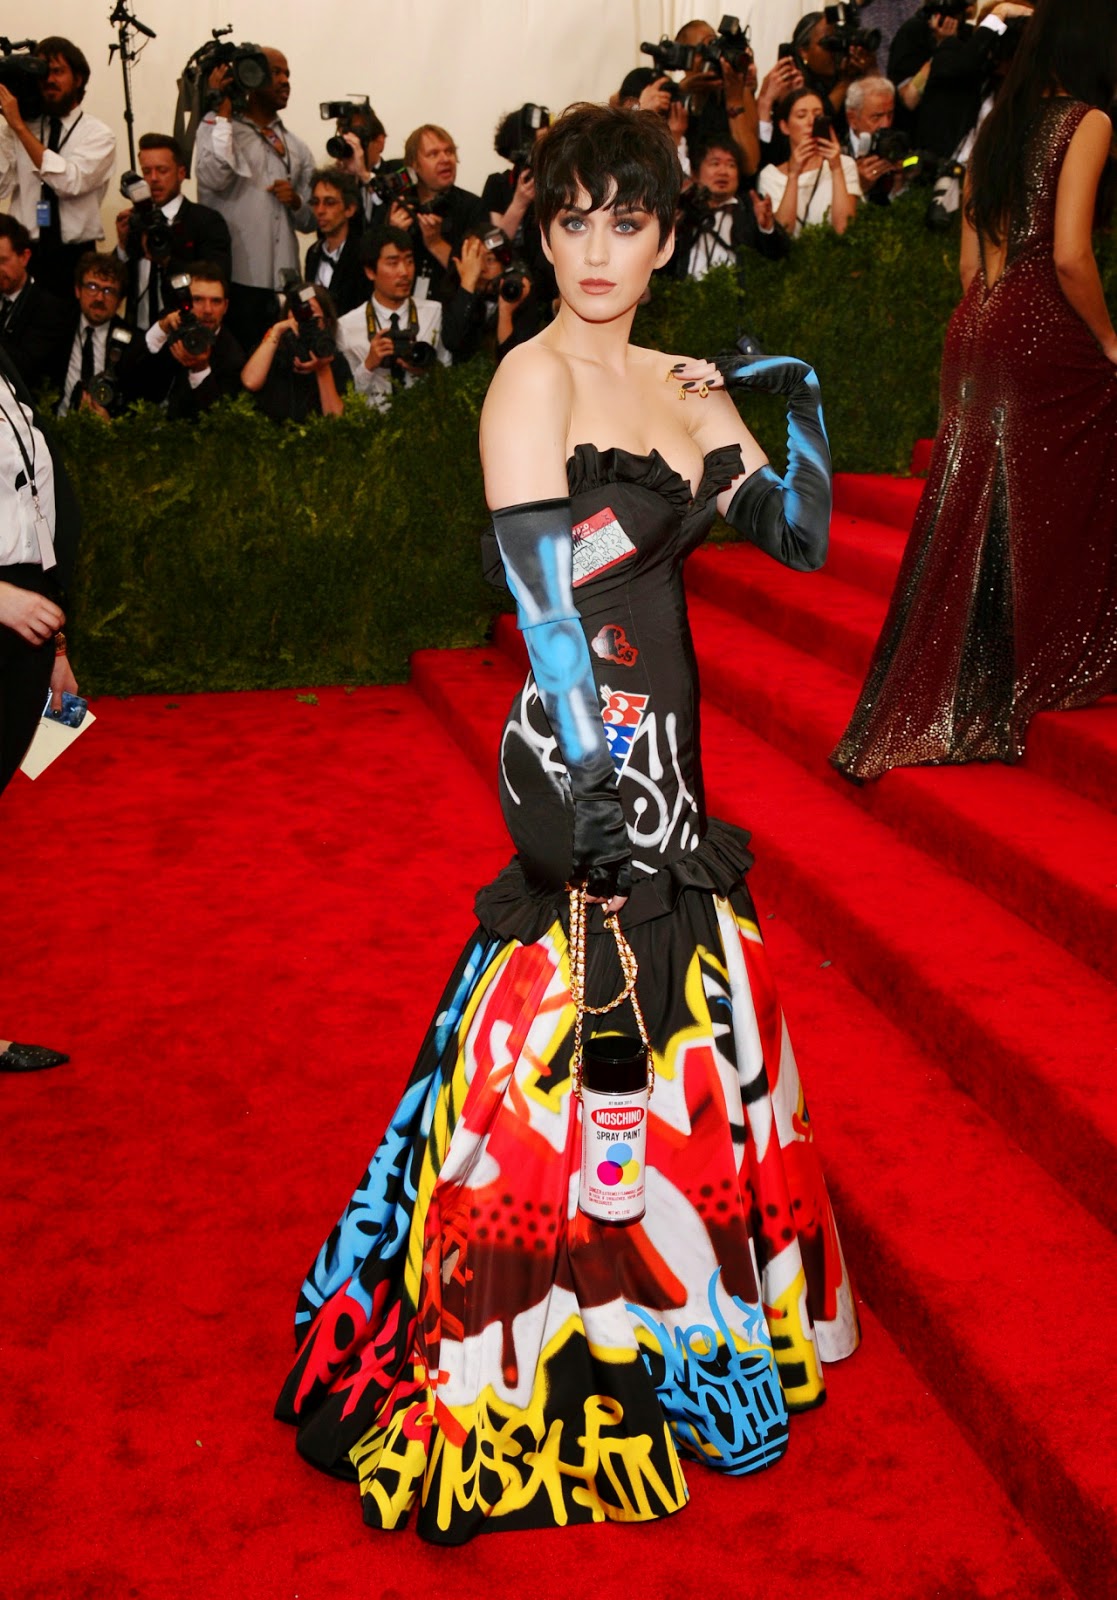 Sip On This...: [Red Carpet Fab] Your Favorite Celebs at the Met Gala Ball!